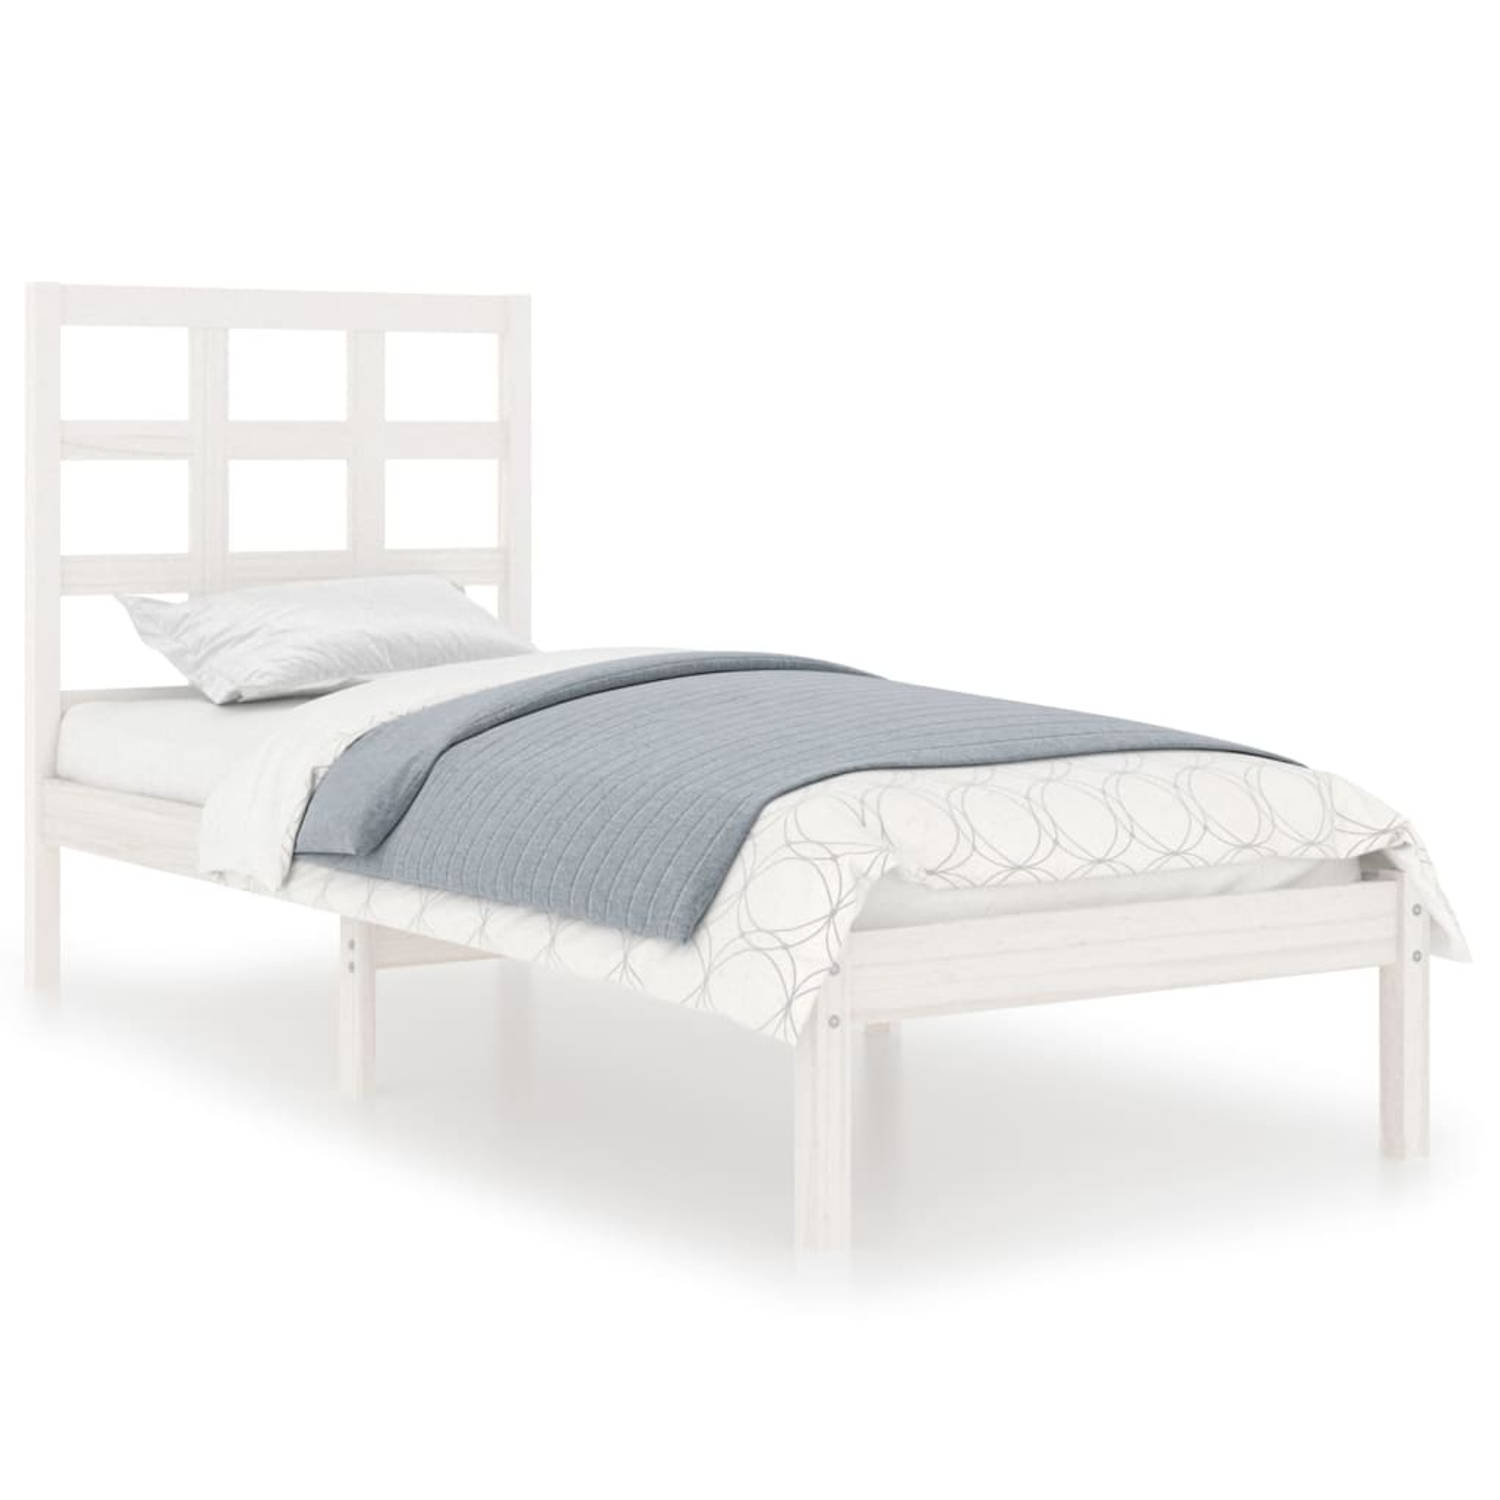 The Living Store Bedframe massief hout wit 100x200 cm - Bedframe - Bedframes - Eenpersoonsbed - Bed - Bedombouw - Ledikant - Houten Bedframe - Eenpersoonsbedden - Bedden - Bedombou